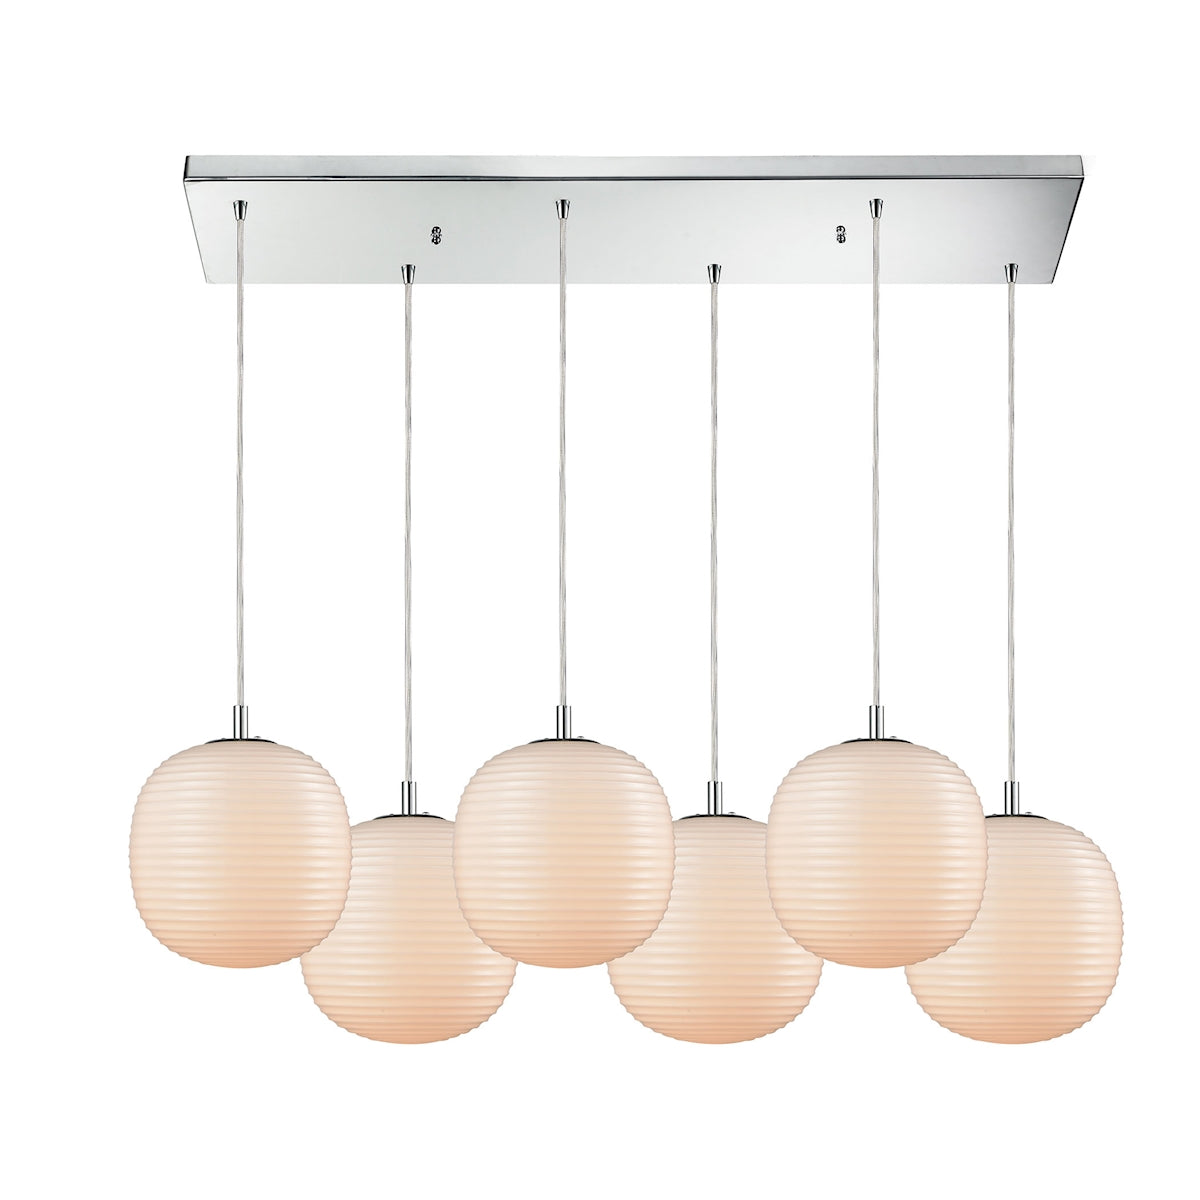 ELK Lighting 56560/6RC Beehive 6-Light Rectangular Pendant Fixture in Polished Chrome with Opal White Beehive Glass